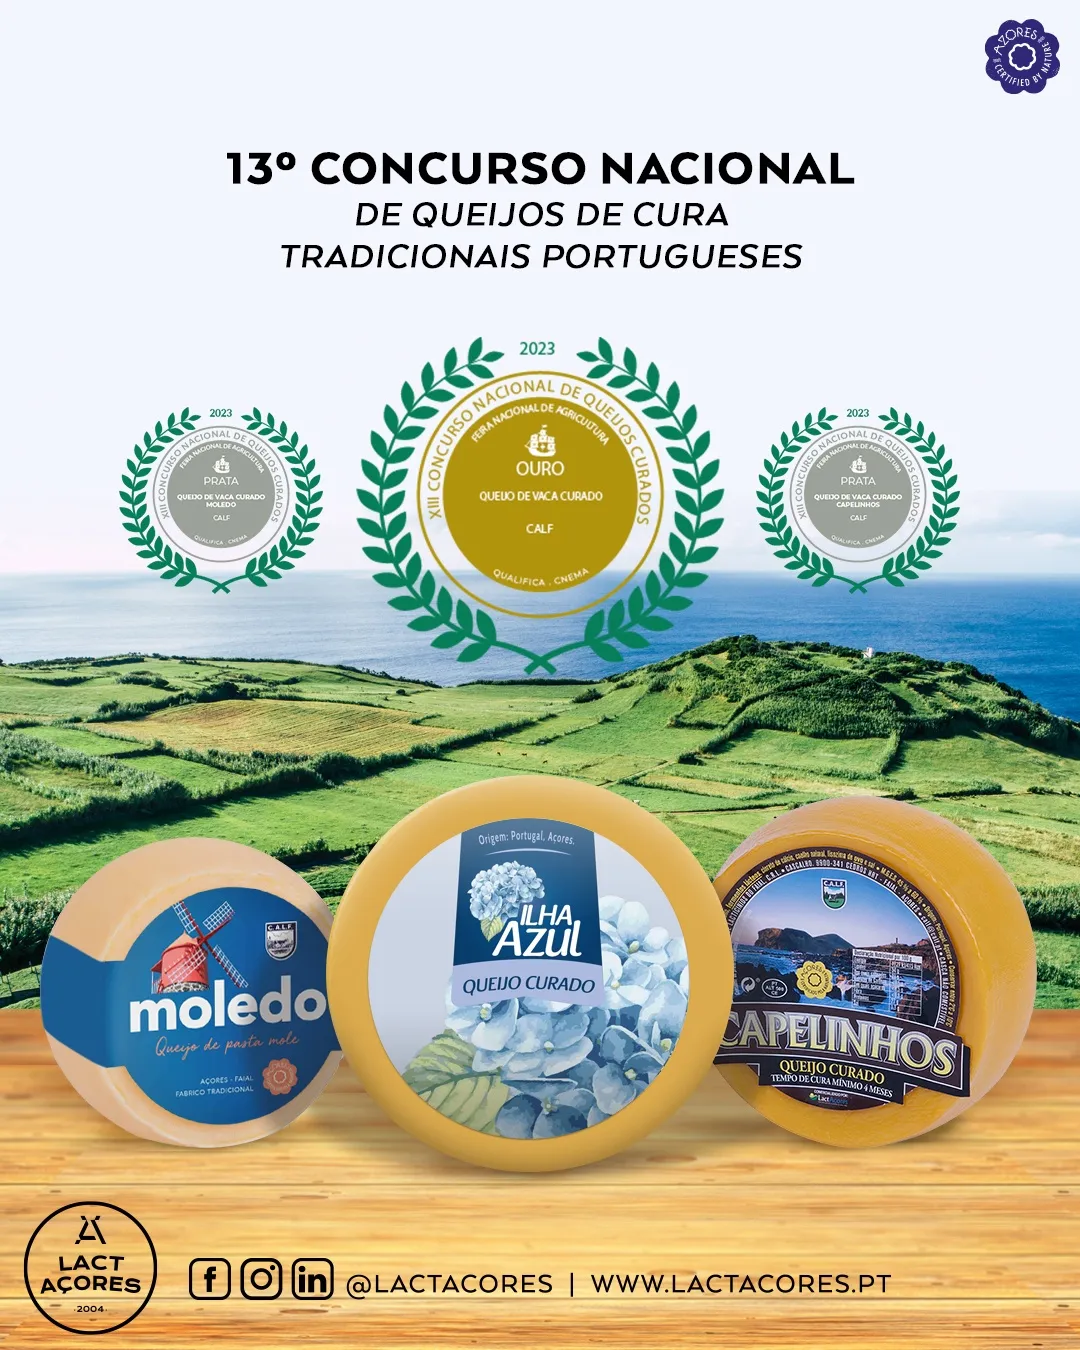 São Jorge DOP Cheese and Ilha Azul Cheese Win GOLD at the 13th Portuguese Traditional Cheese Competition for Prolonged Maturation